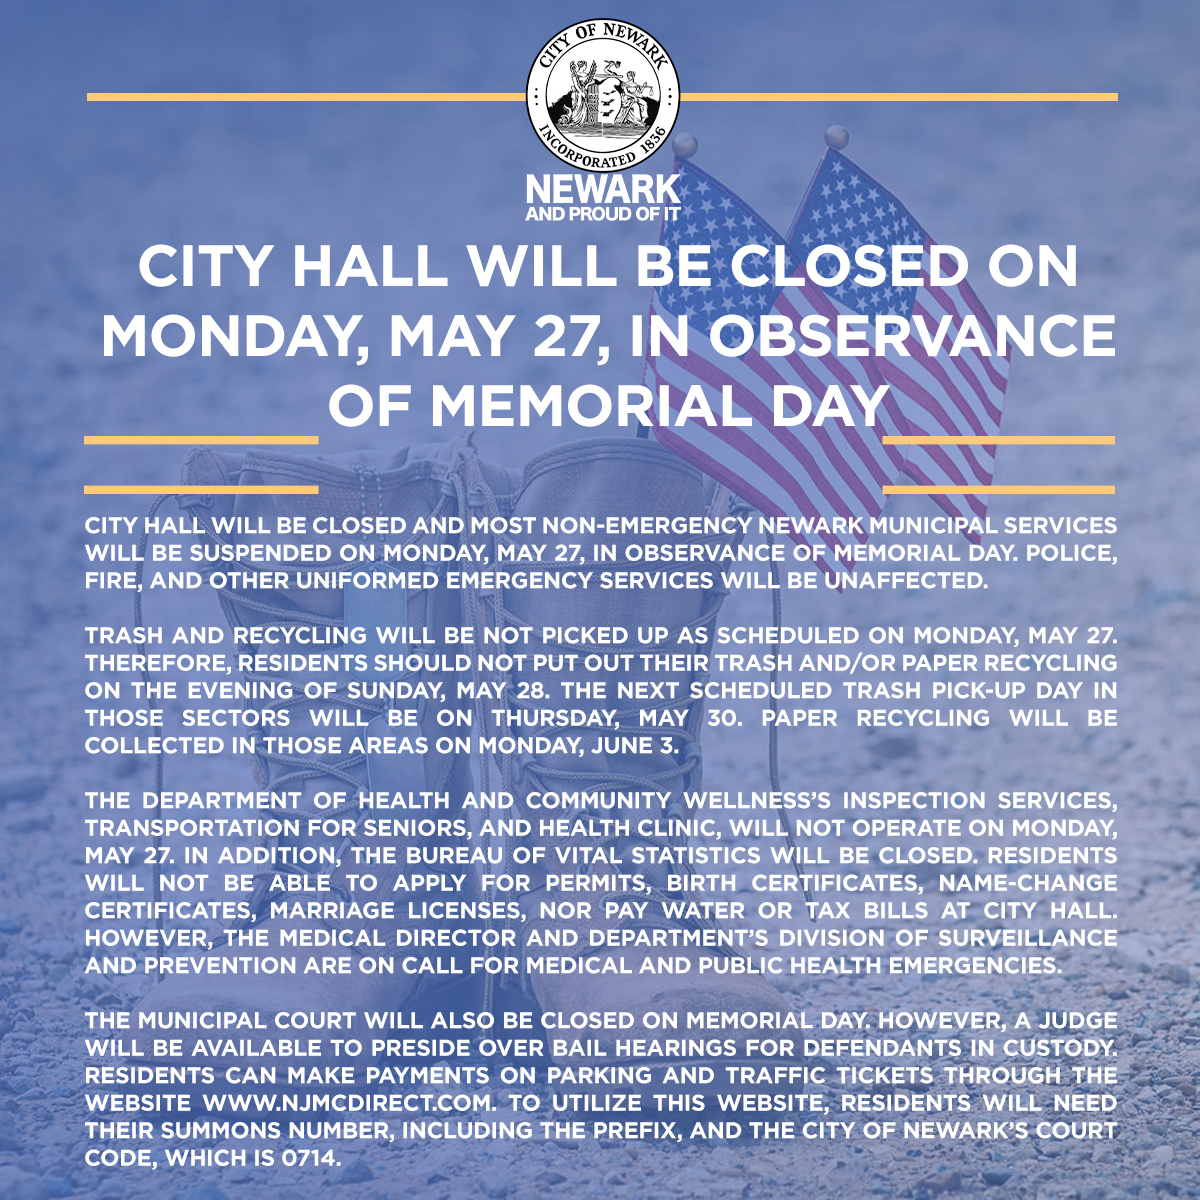 CITY OF NEWARK REMINDS RESIDENTS THAT CITY HALL WILL BE CLOSED ON MONDAY, MAY 27, IN OBSERVANCE OF MEMORIAL DAY. Newark municipal services will be suspended on Monday, May 27, in observance of Memorial Day. Police, Fire, and other uniformed emergency services will be unaffected.